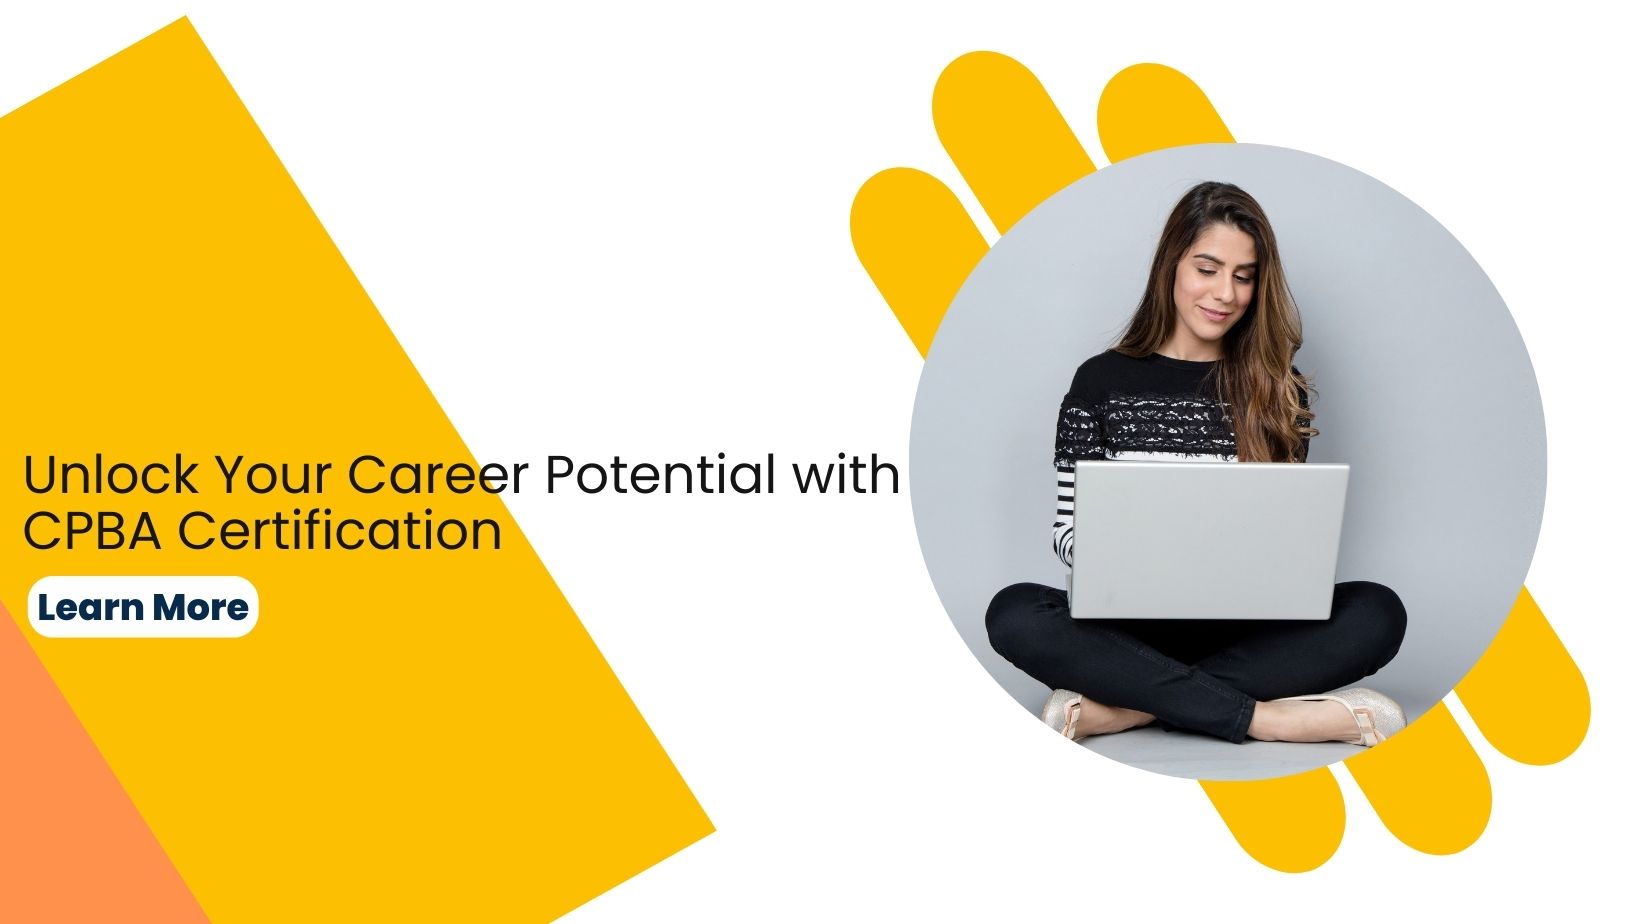 Your Career Potential with CPBA Certification